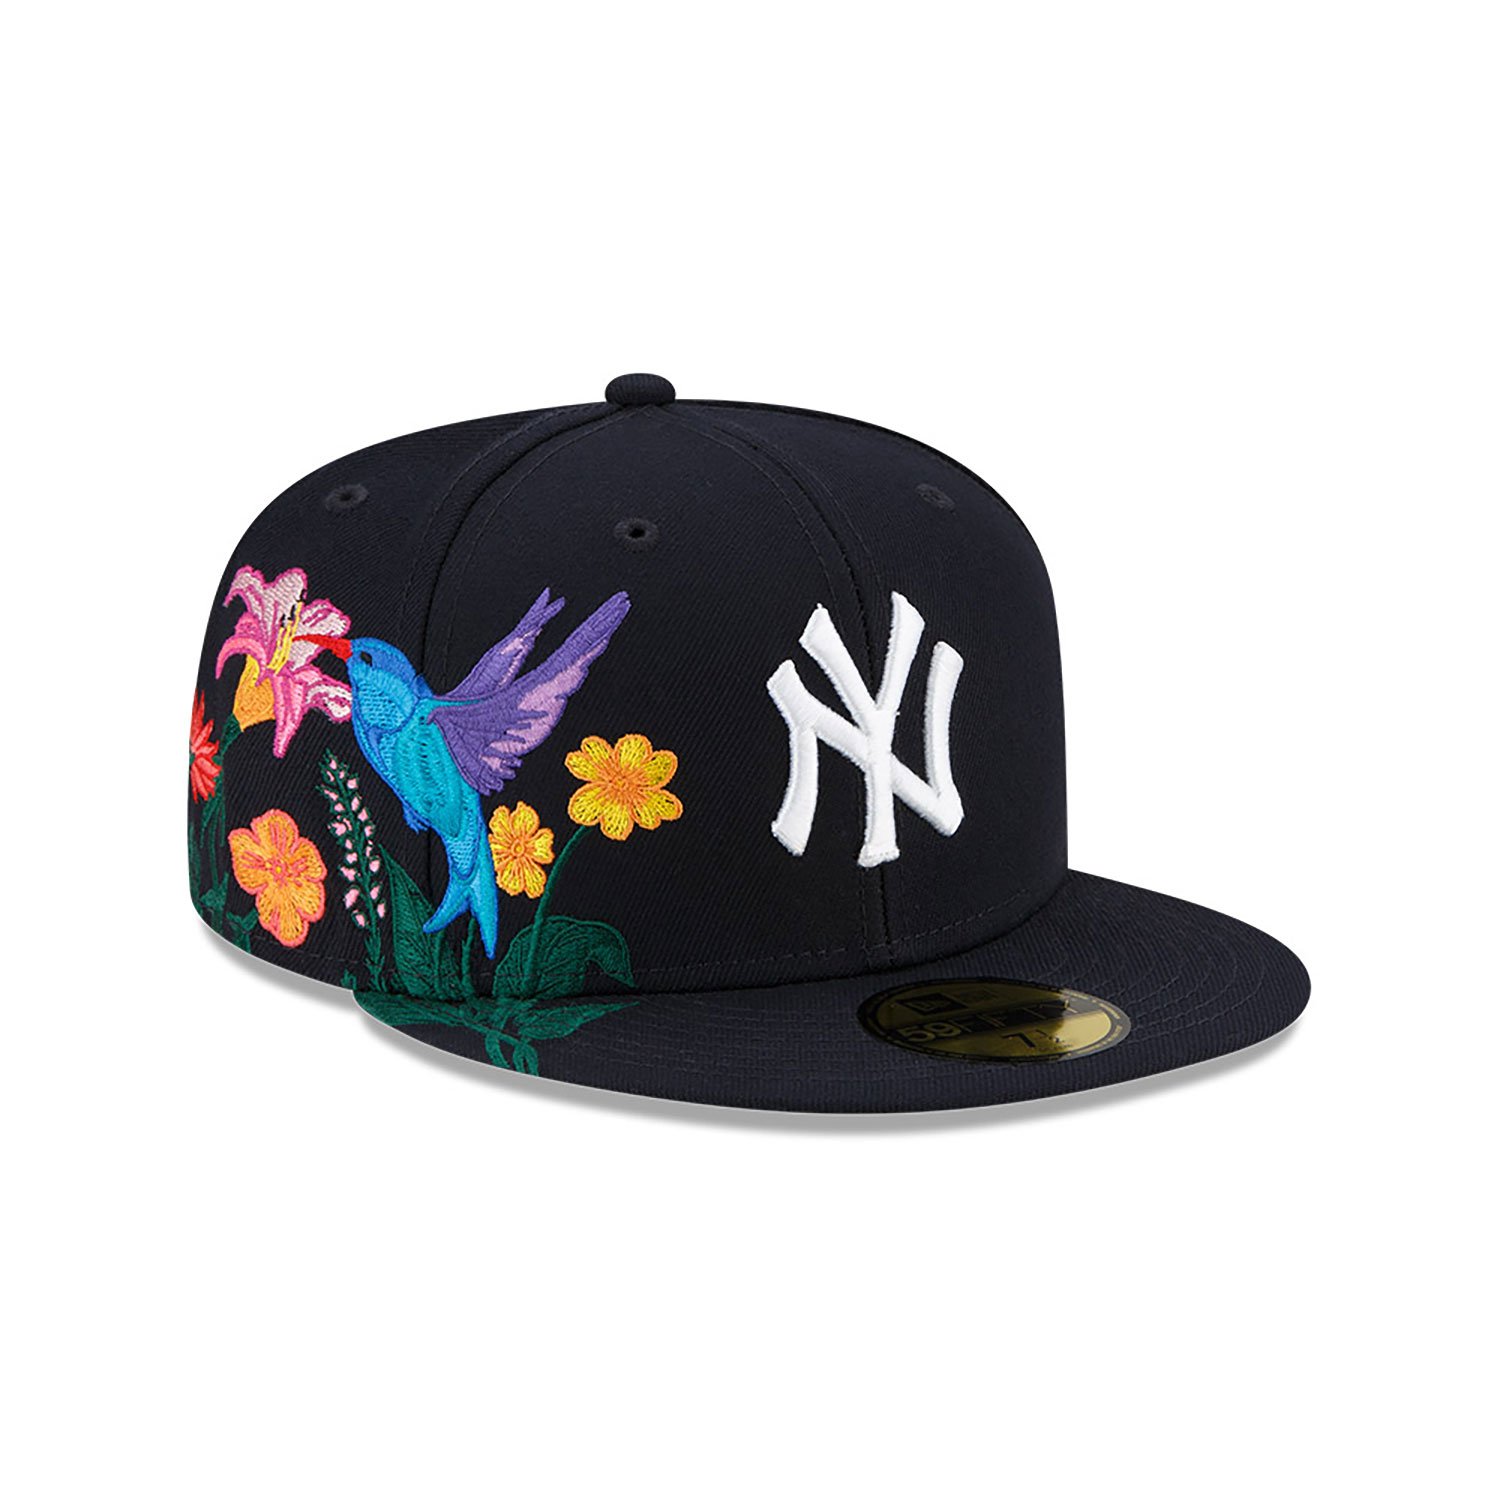 https://www.neweracap.co.uk/globalassets/products/b4994_282/60243454/new-york-yankees-mlb-blooming-navy-59fifty-fitted-cap-60243454-left.jpg